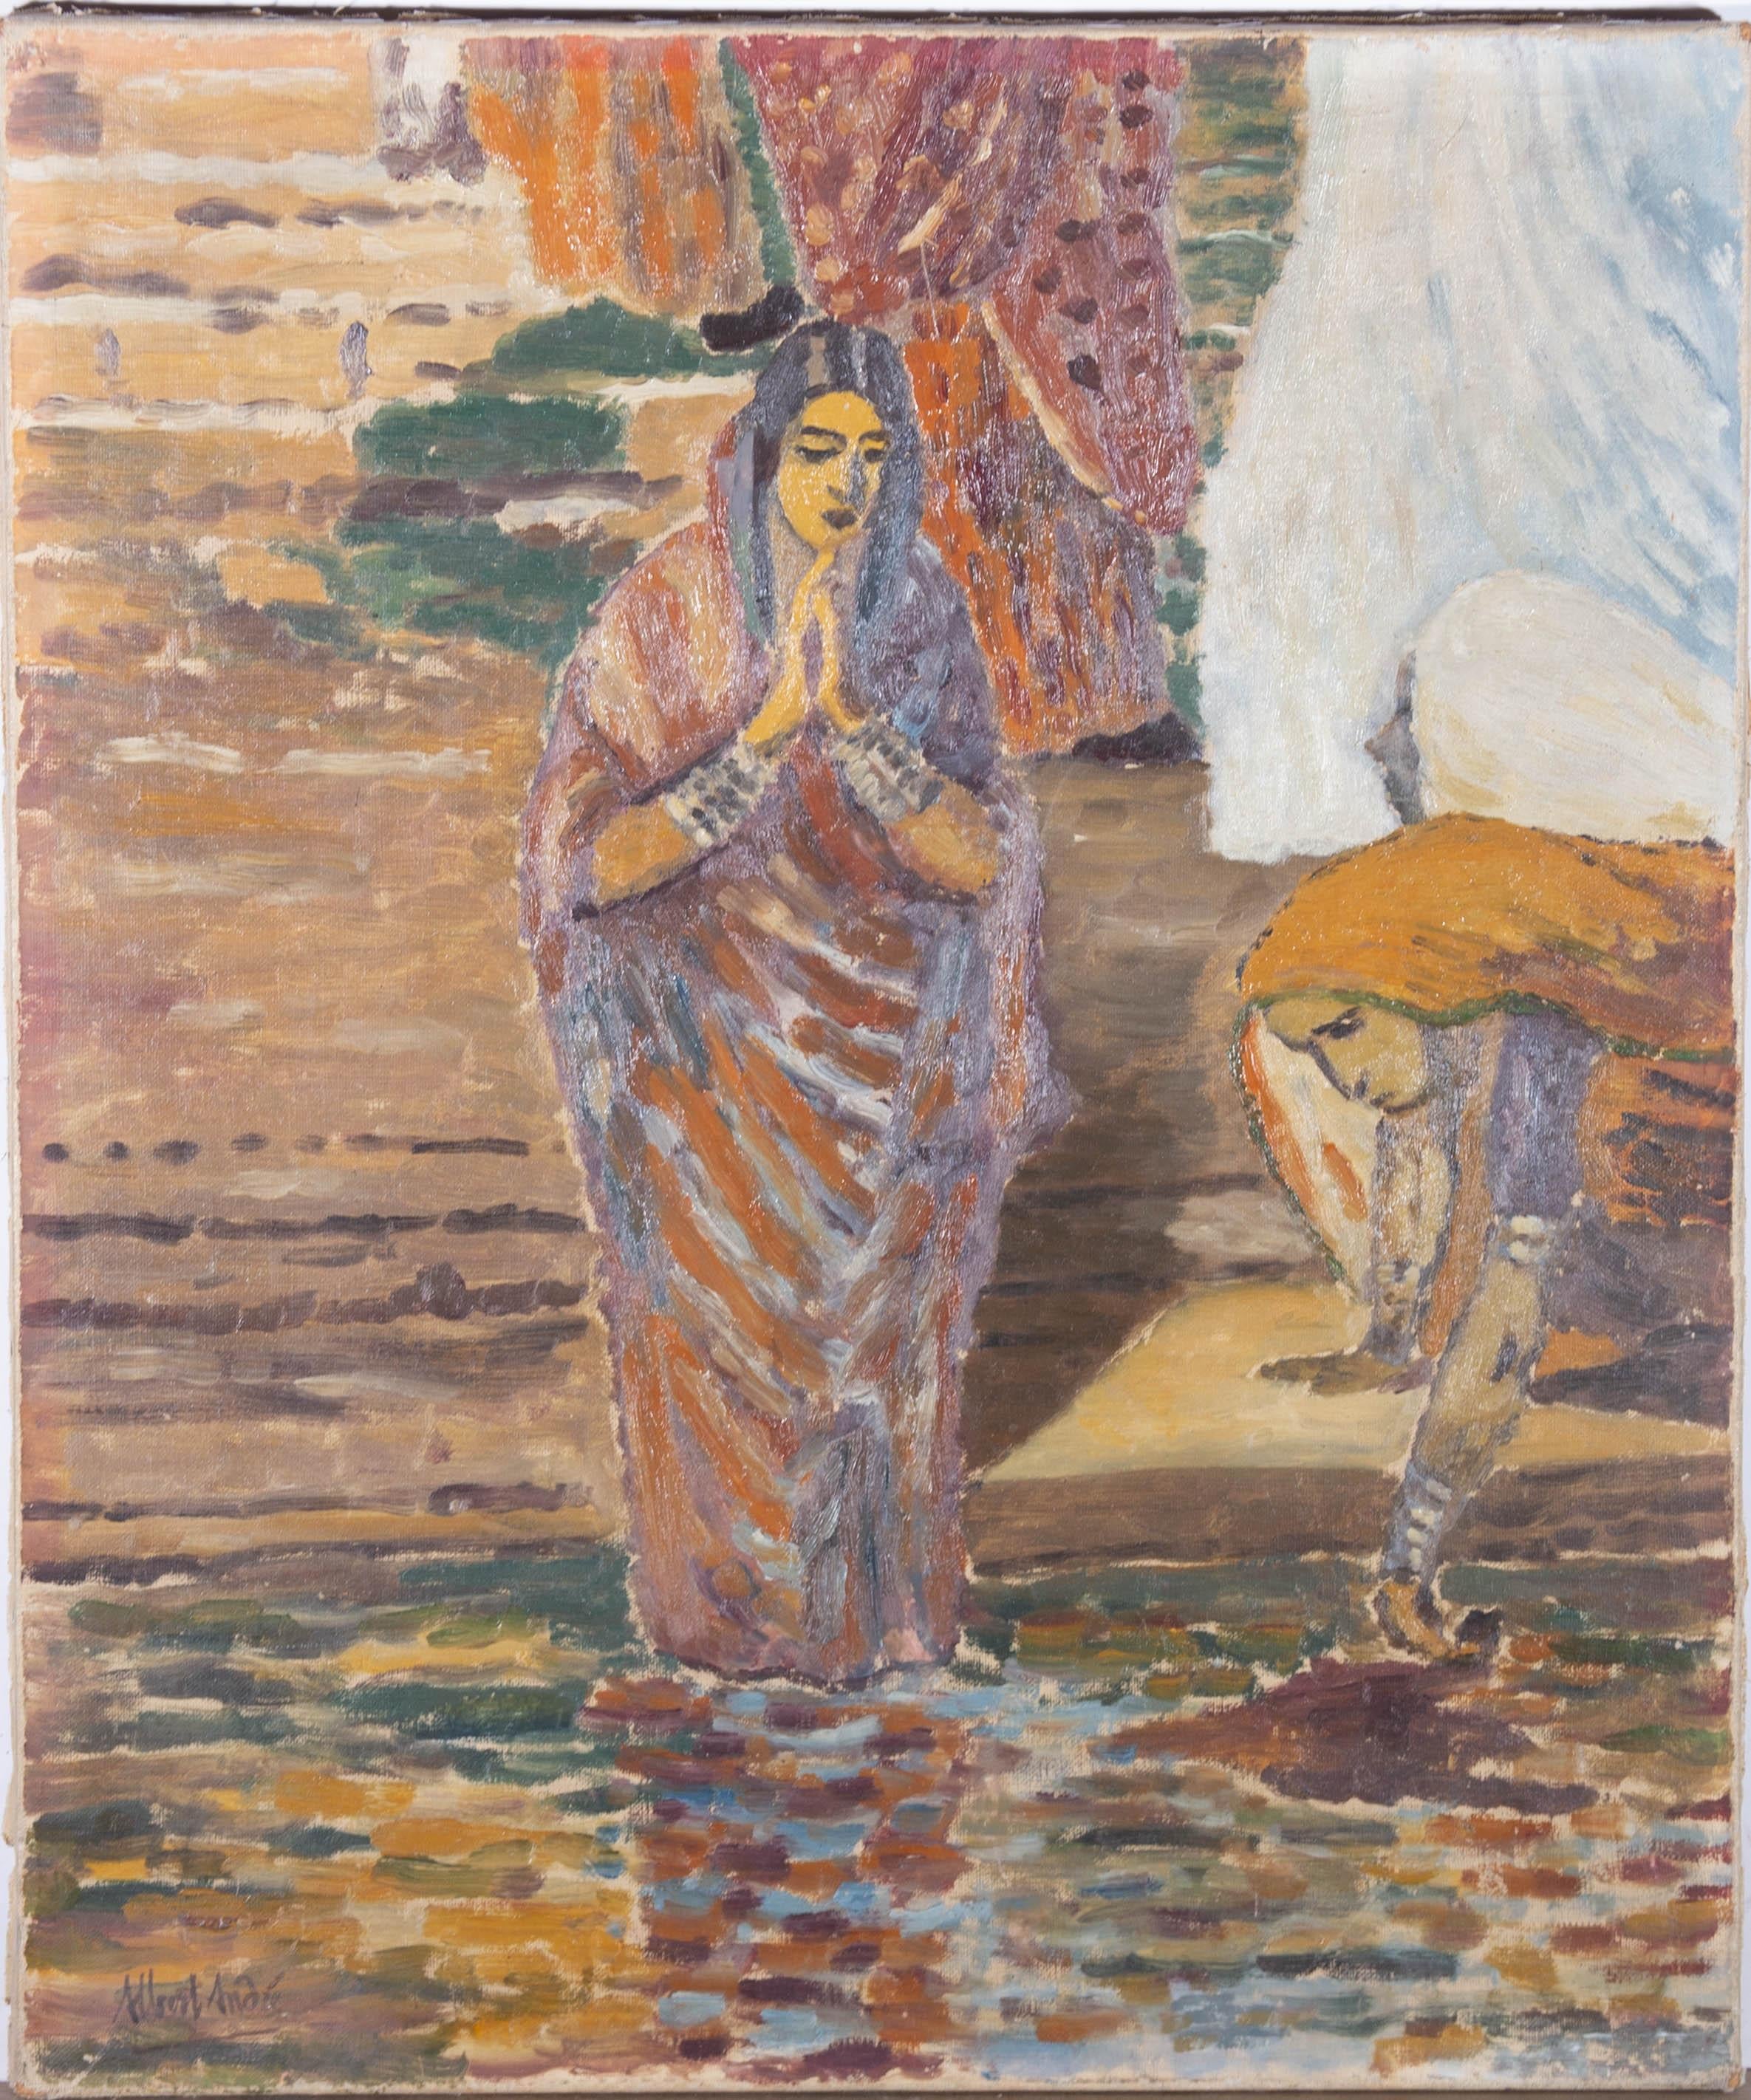 Attribué. Albert Andr (1869-1954) - 1893 Huile, Washing In The Ganges - Marron Portrait Painting par Attrib. Albert André